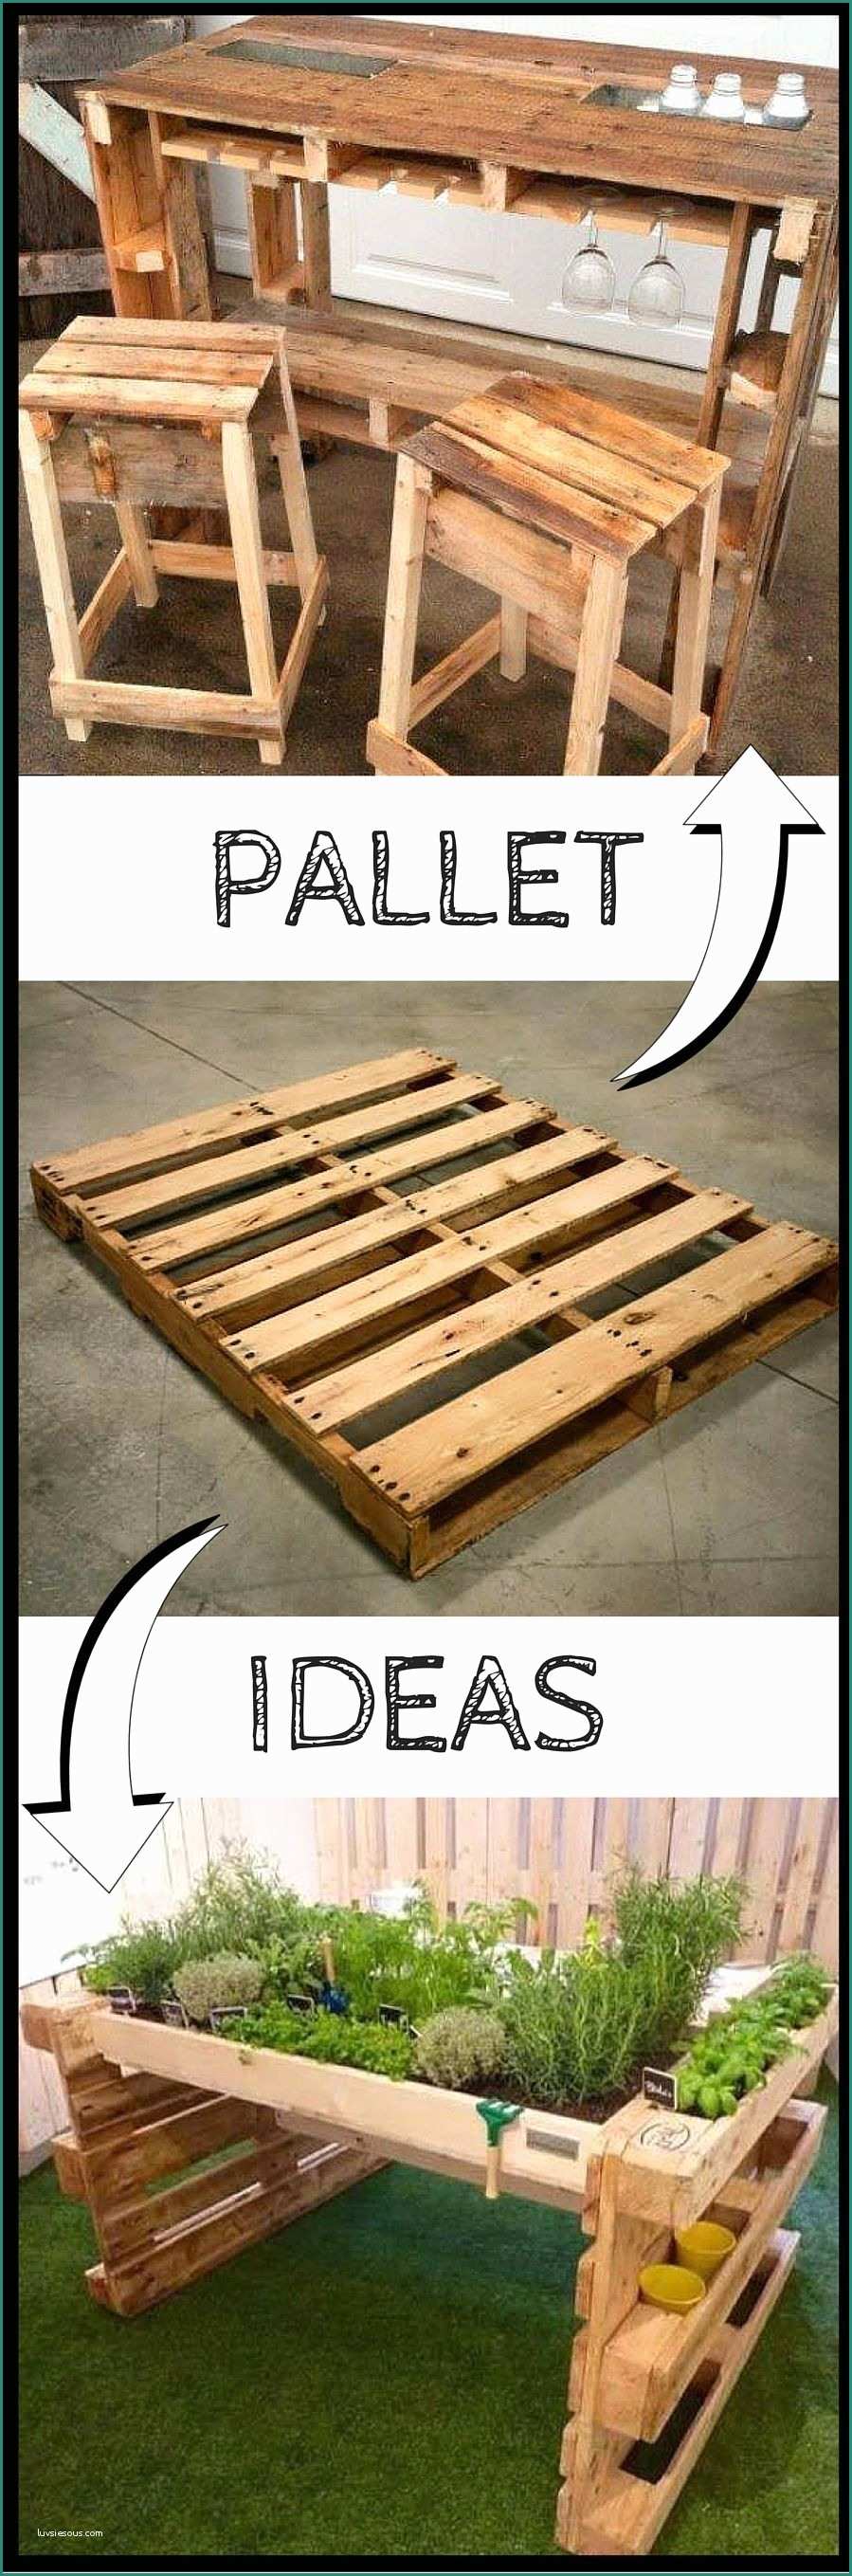 Fioriera Con Pallet E 200 Ways to Recycle Wooden Pallets Great for the Home Great